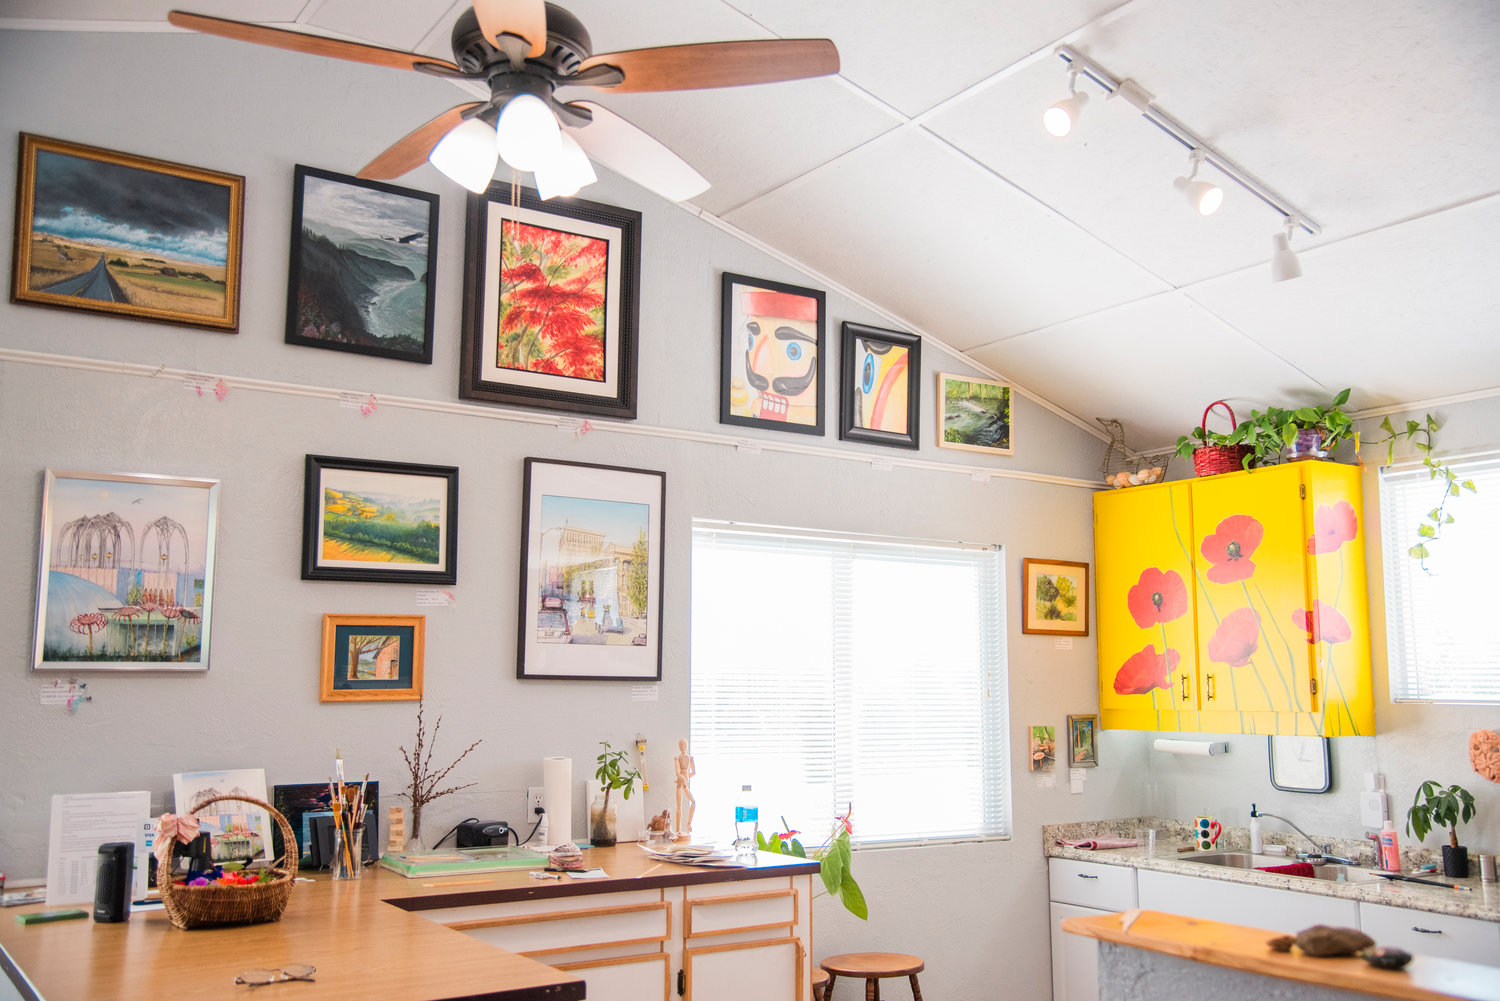 Paintings fill walls and cupboards in Barbara Burres' Cinebar art studio Tuesday afternoon.